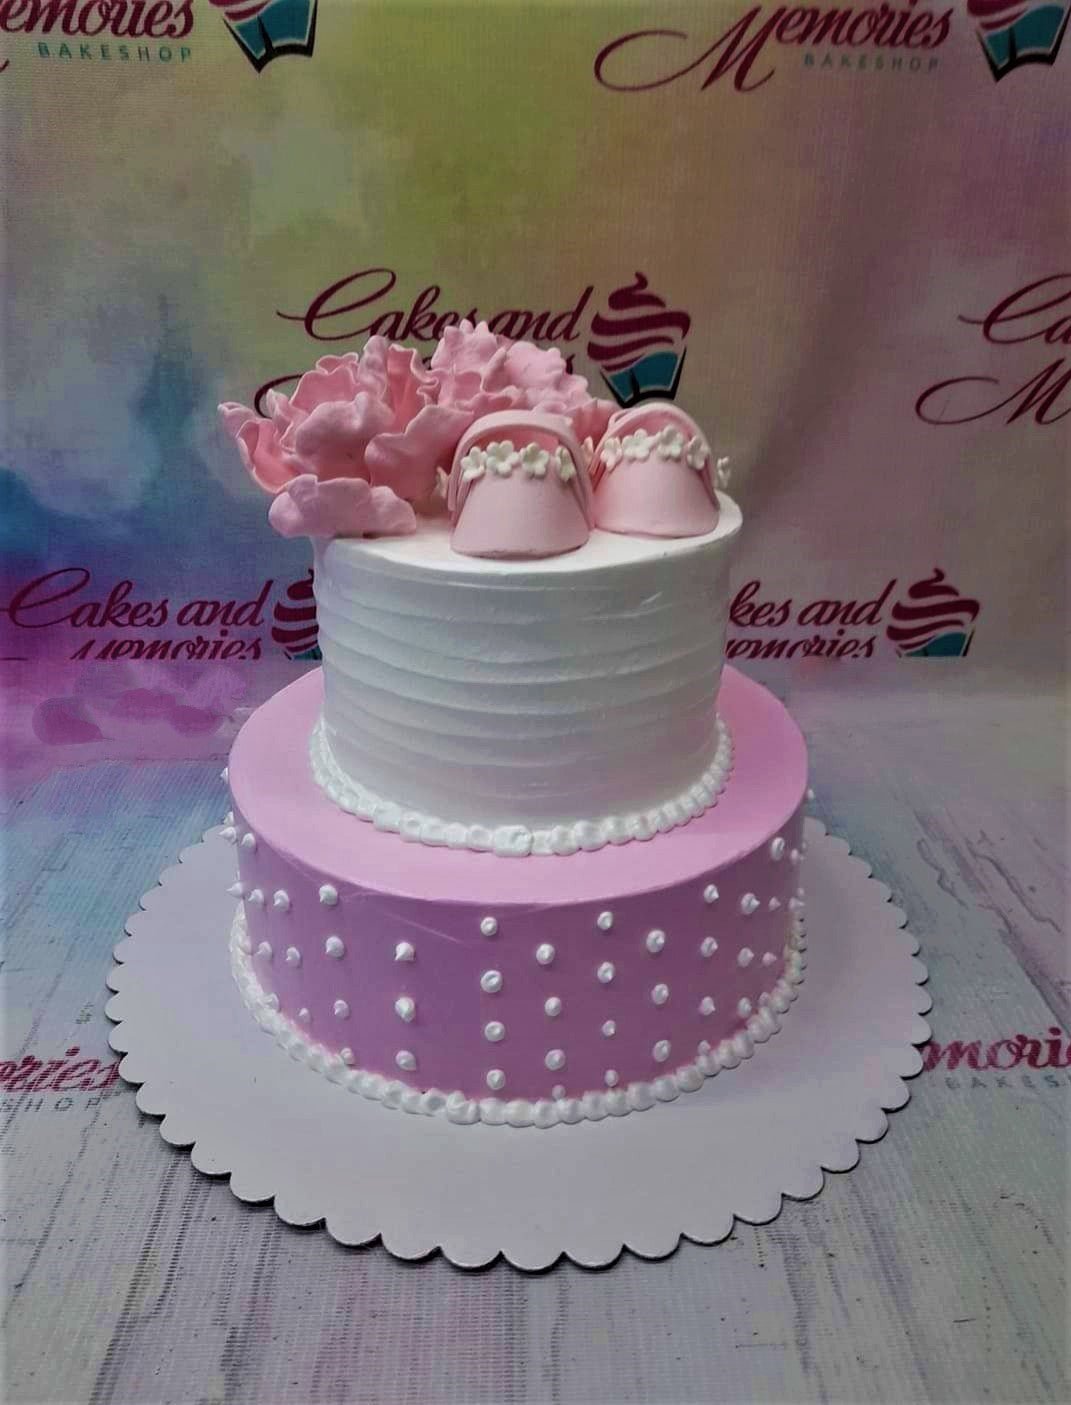 Christening Cake | Truffles Bakers & Confectioners LTD